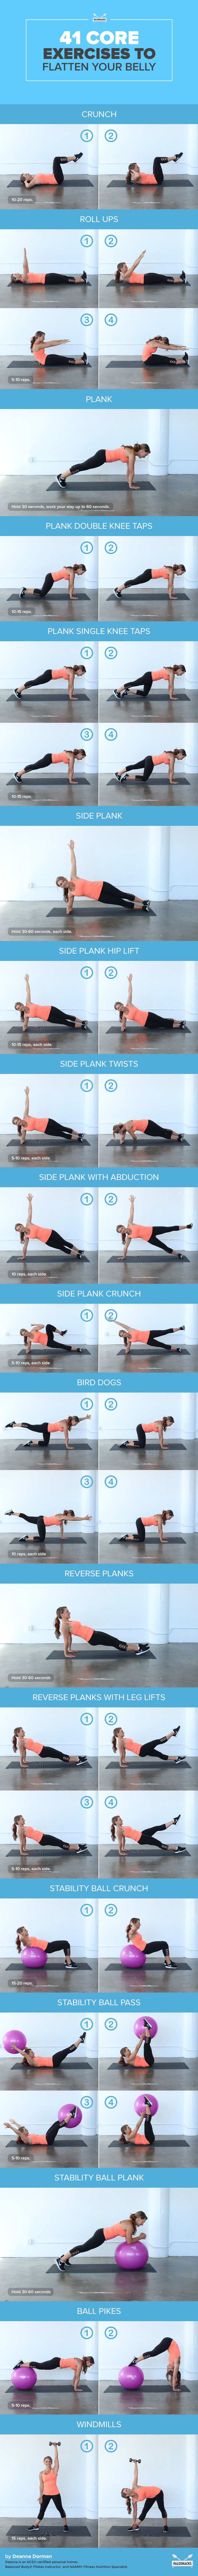 41_Core_Exercises_to_Flatten_Your_Belly-infog